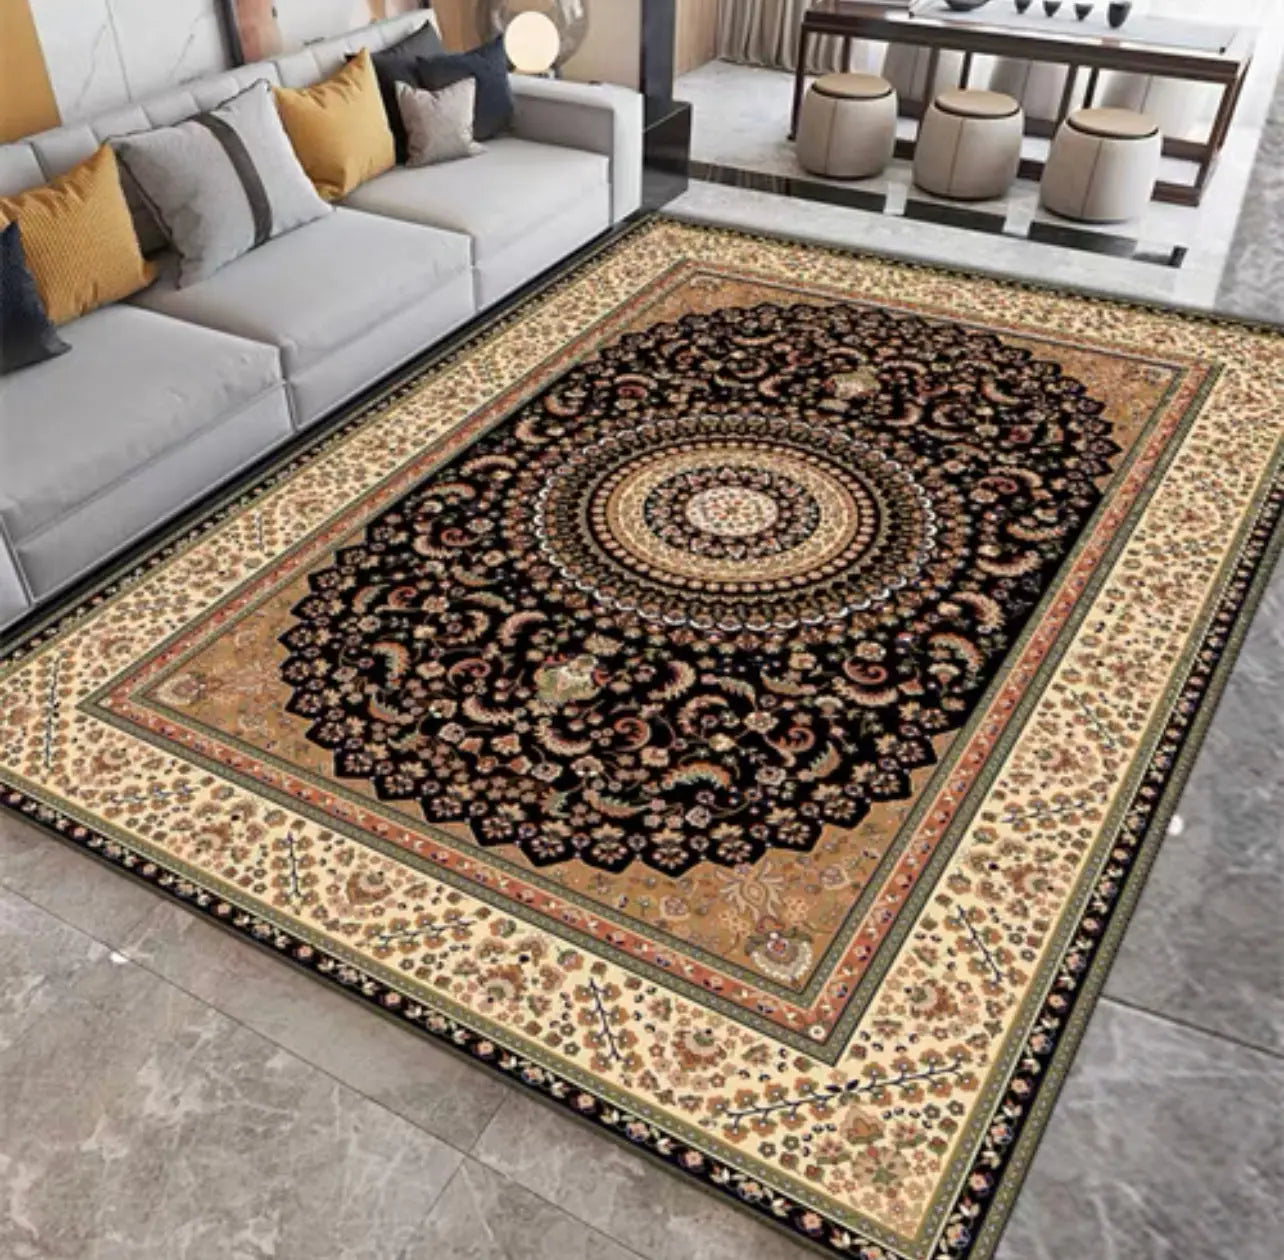 OS 70 Persian Style Rug The Carpet Maker